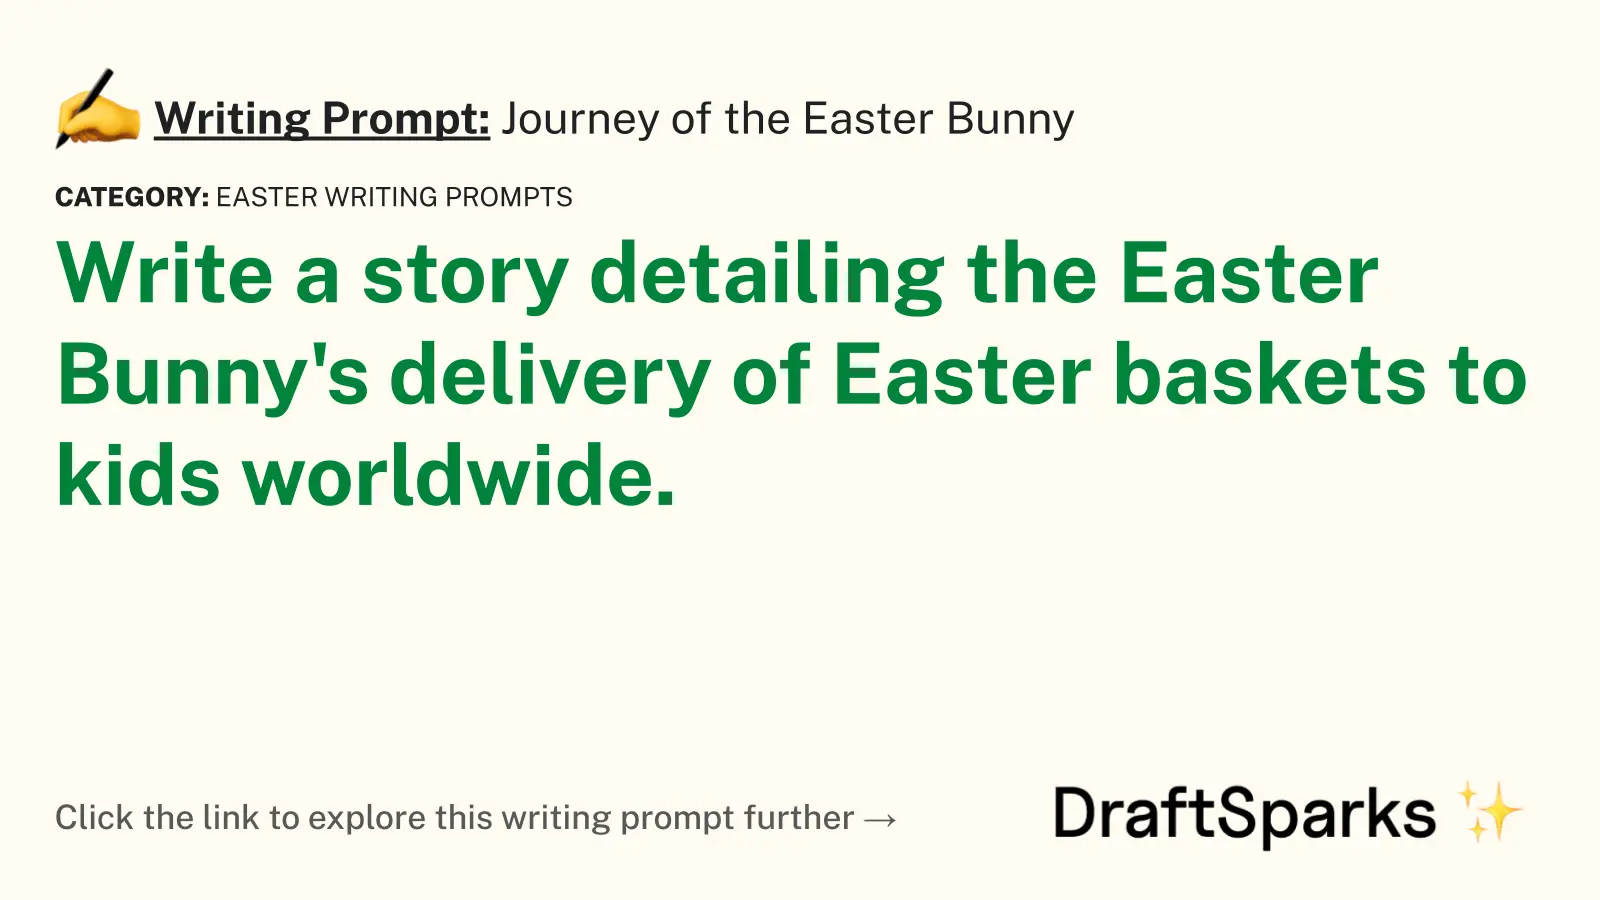 Journey of the Easter Bunny